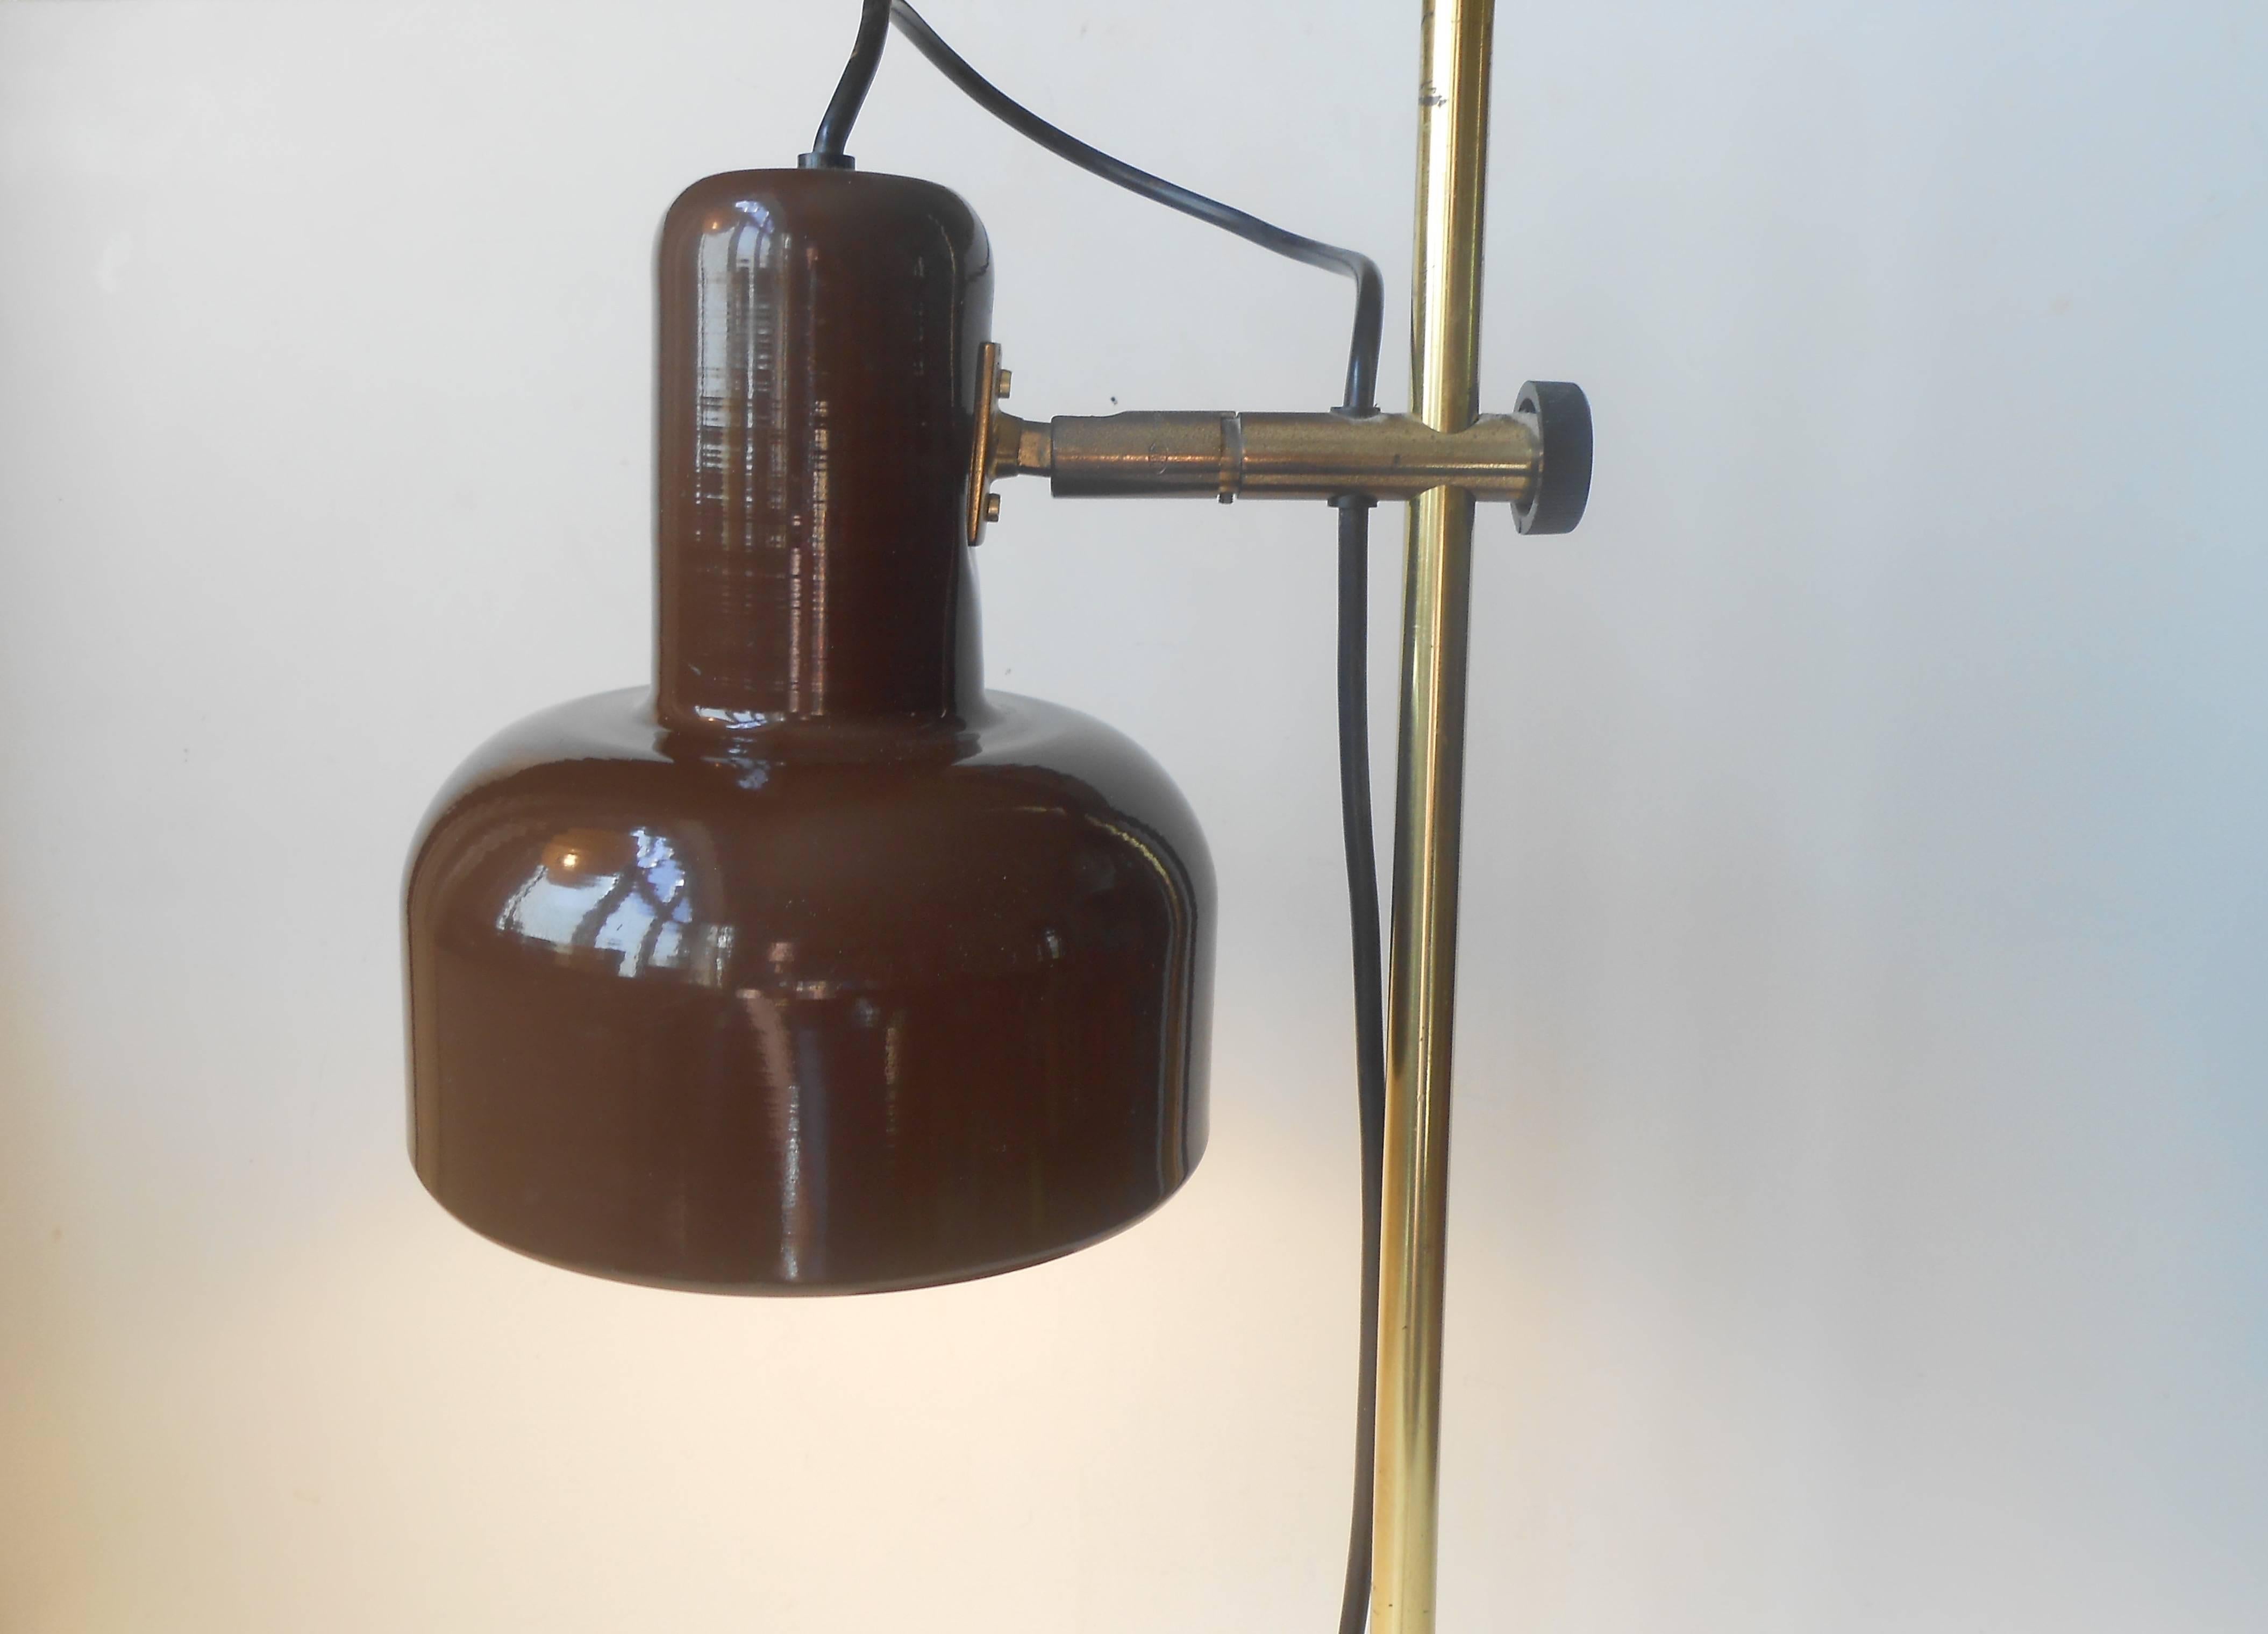 Fully adjustable table lamp designed by Jo Hammerborg and manufactured by Fog & Mørup in the mid-1970s. Solid brass frame and shade-arm. Chocolate brown powder coated base and shade. Measurements: H 53 cm (21 inches),
D shade/base: 15 cm (6 inches).